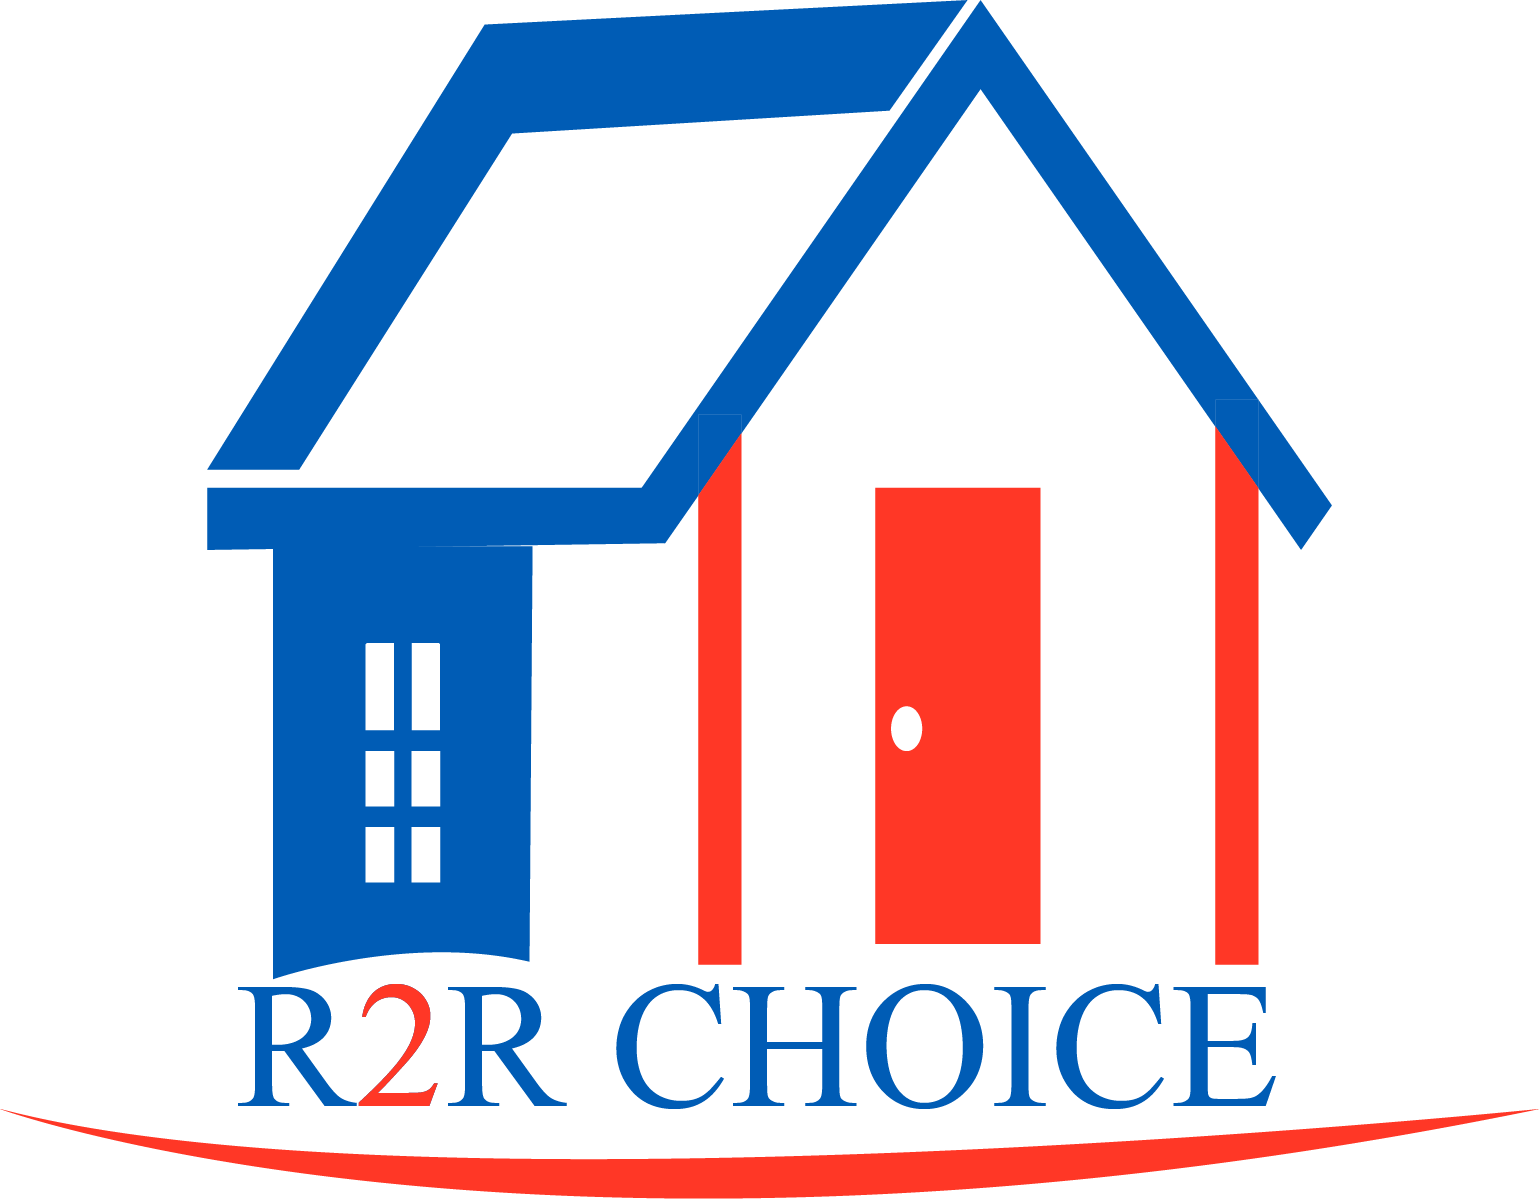 Get to Know About
R2R Choice